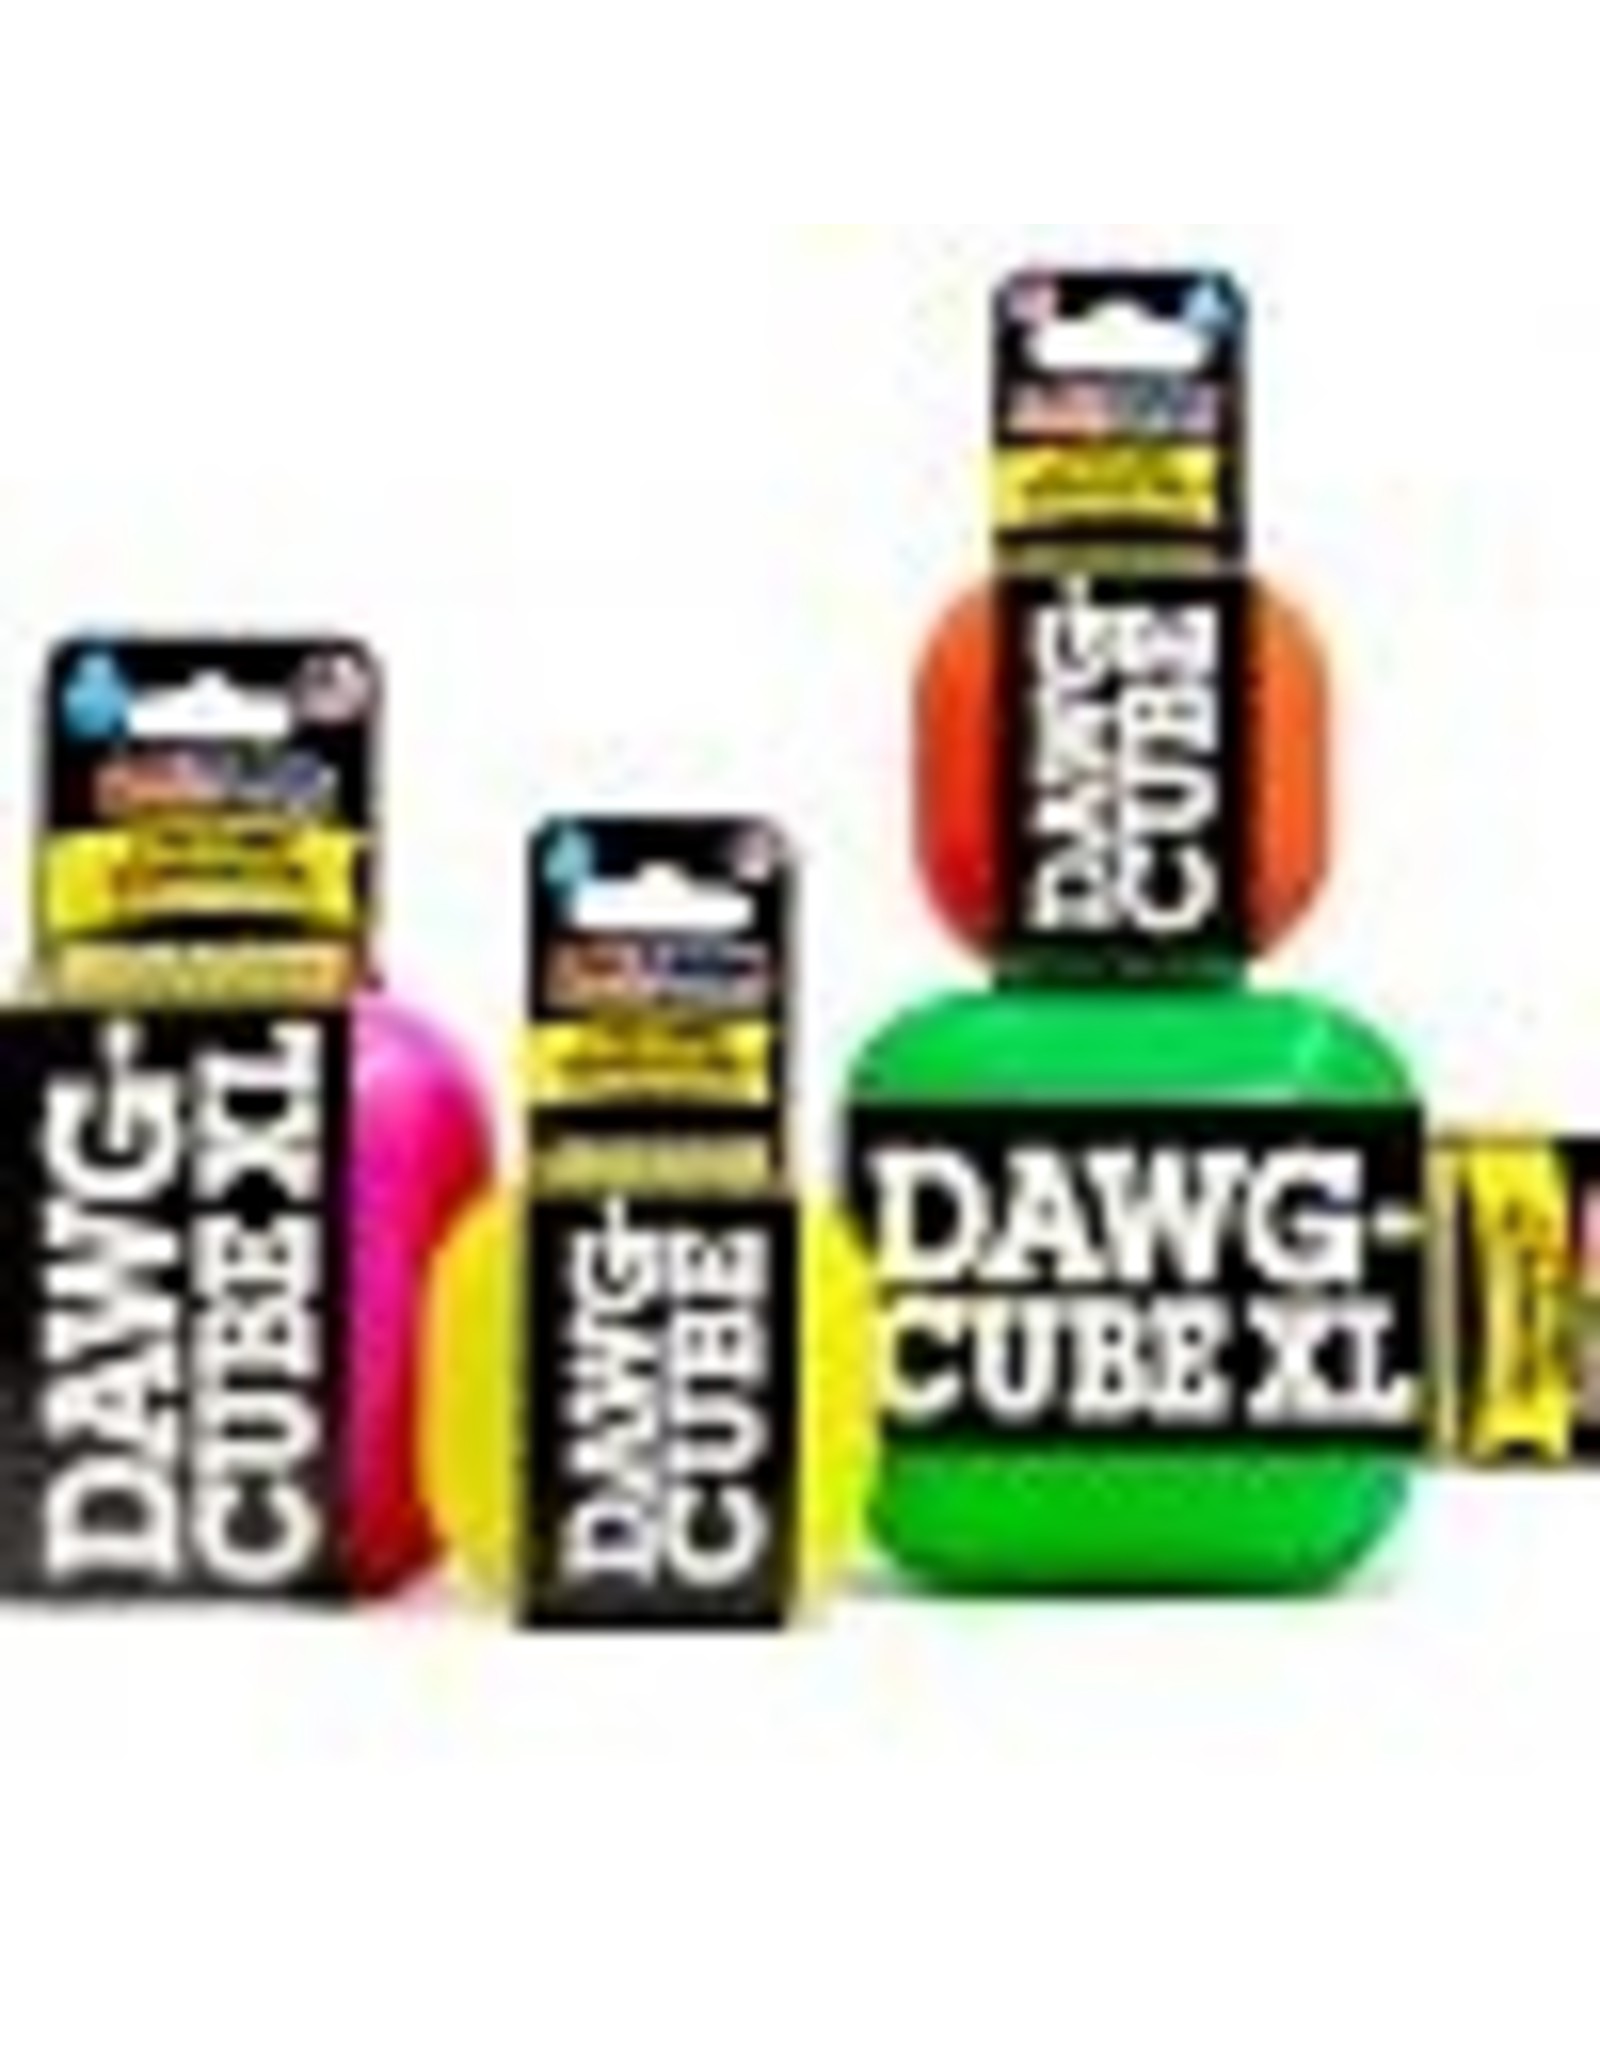 RuffDawg Indestructible Rubber Dawg Cubes